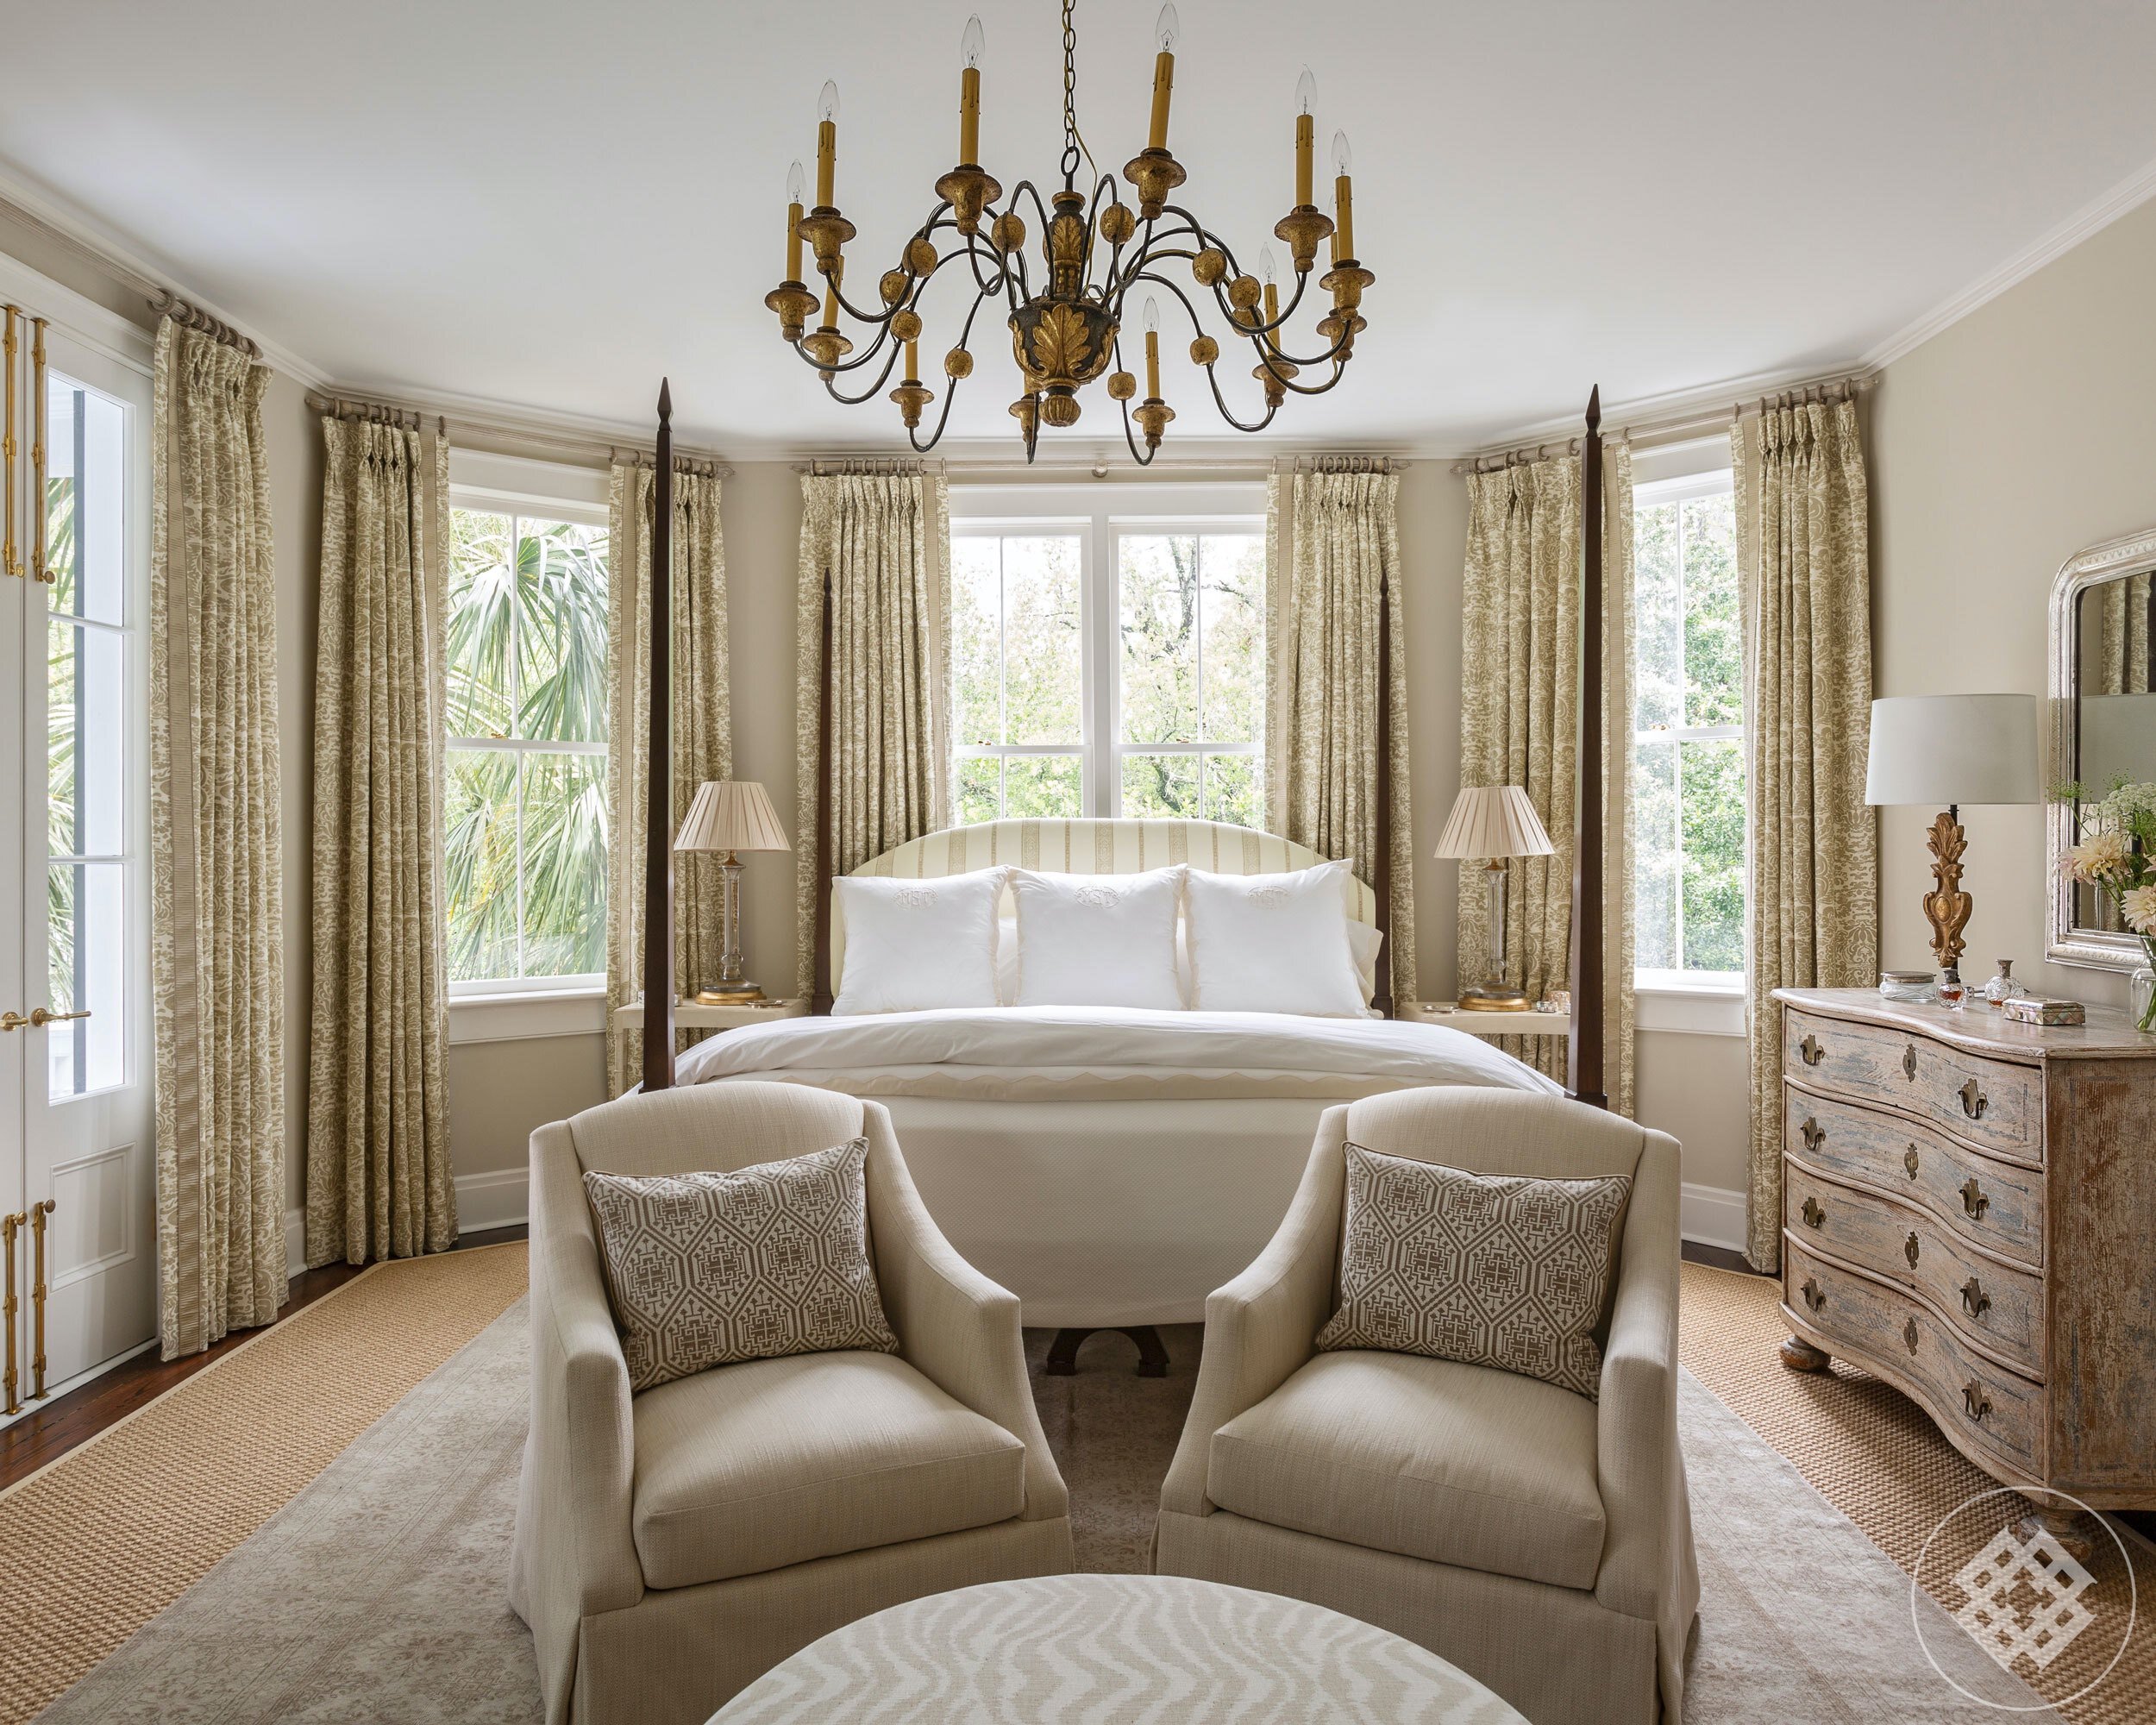 shc-16-relaxing-master-bedroom-featuring-custom-made-king-bed-and-personally-monogrammed-linens.jpg